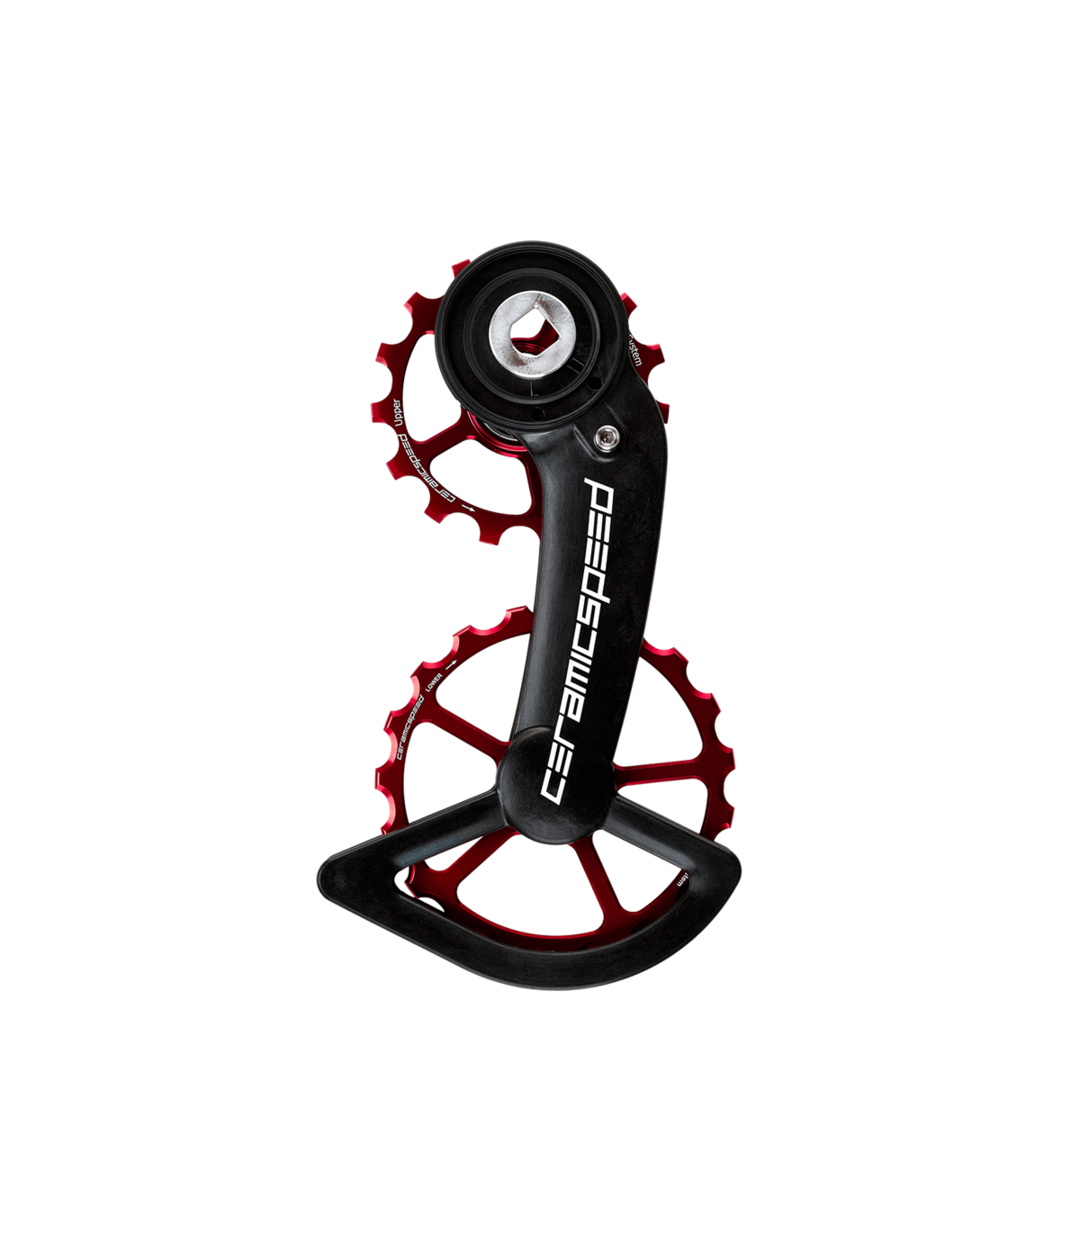 CERAMICSPEED Oversized Pulley Sram Axs Red/Force - Red